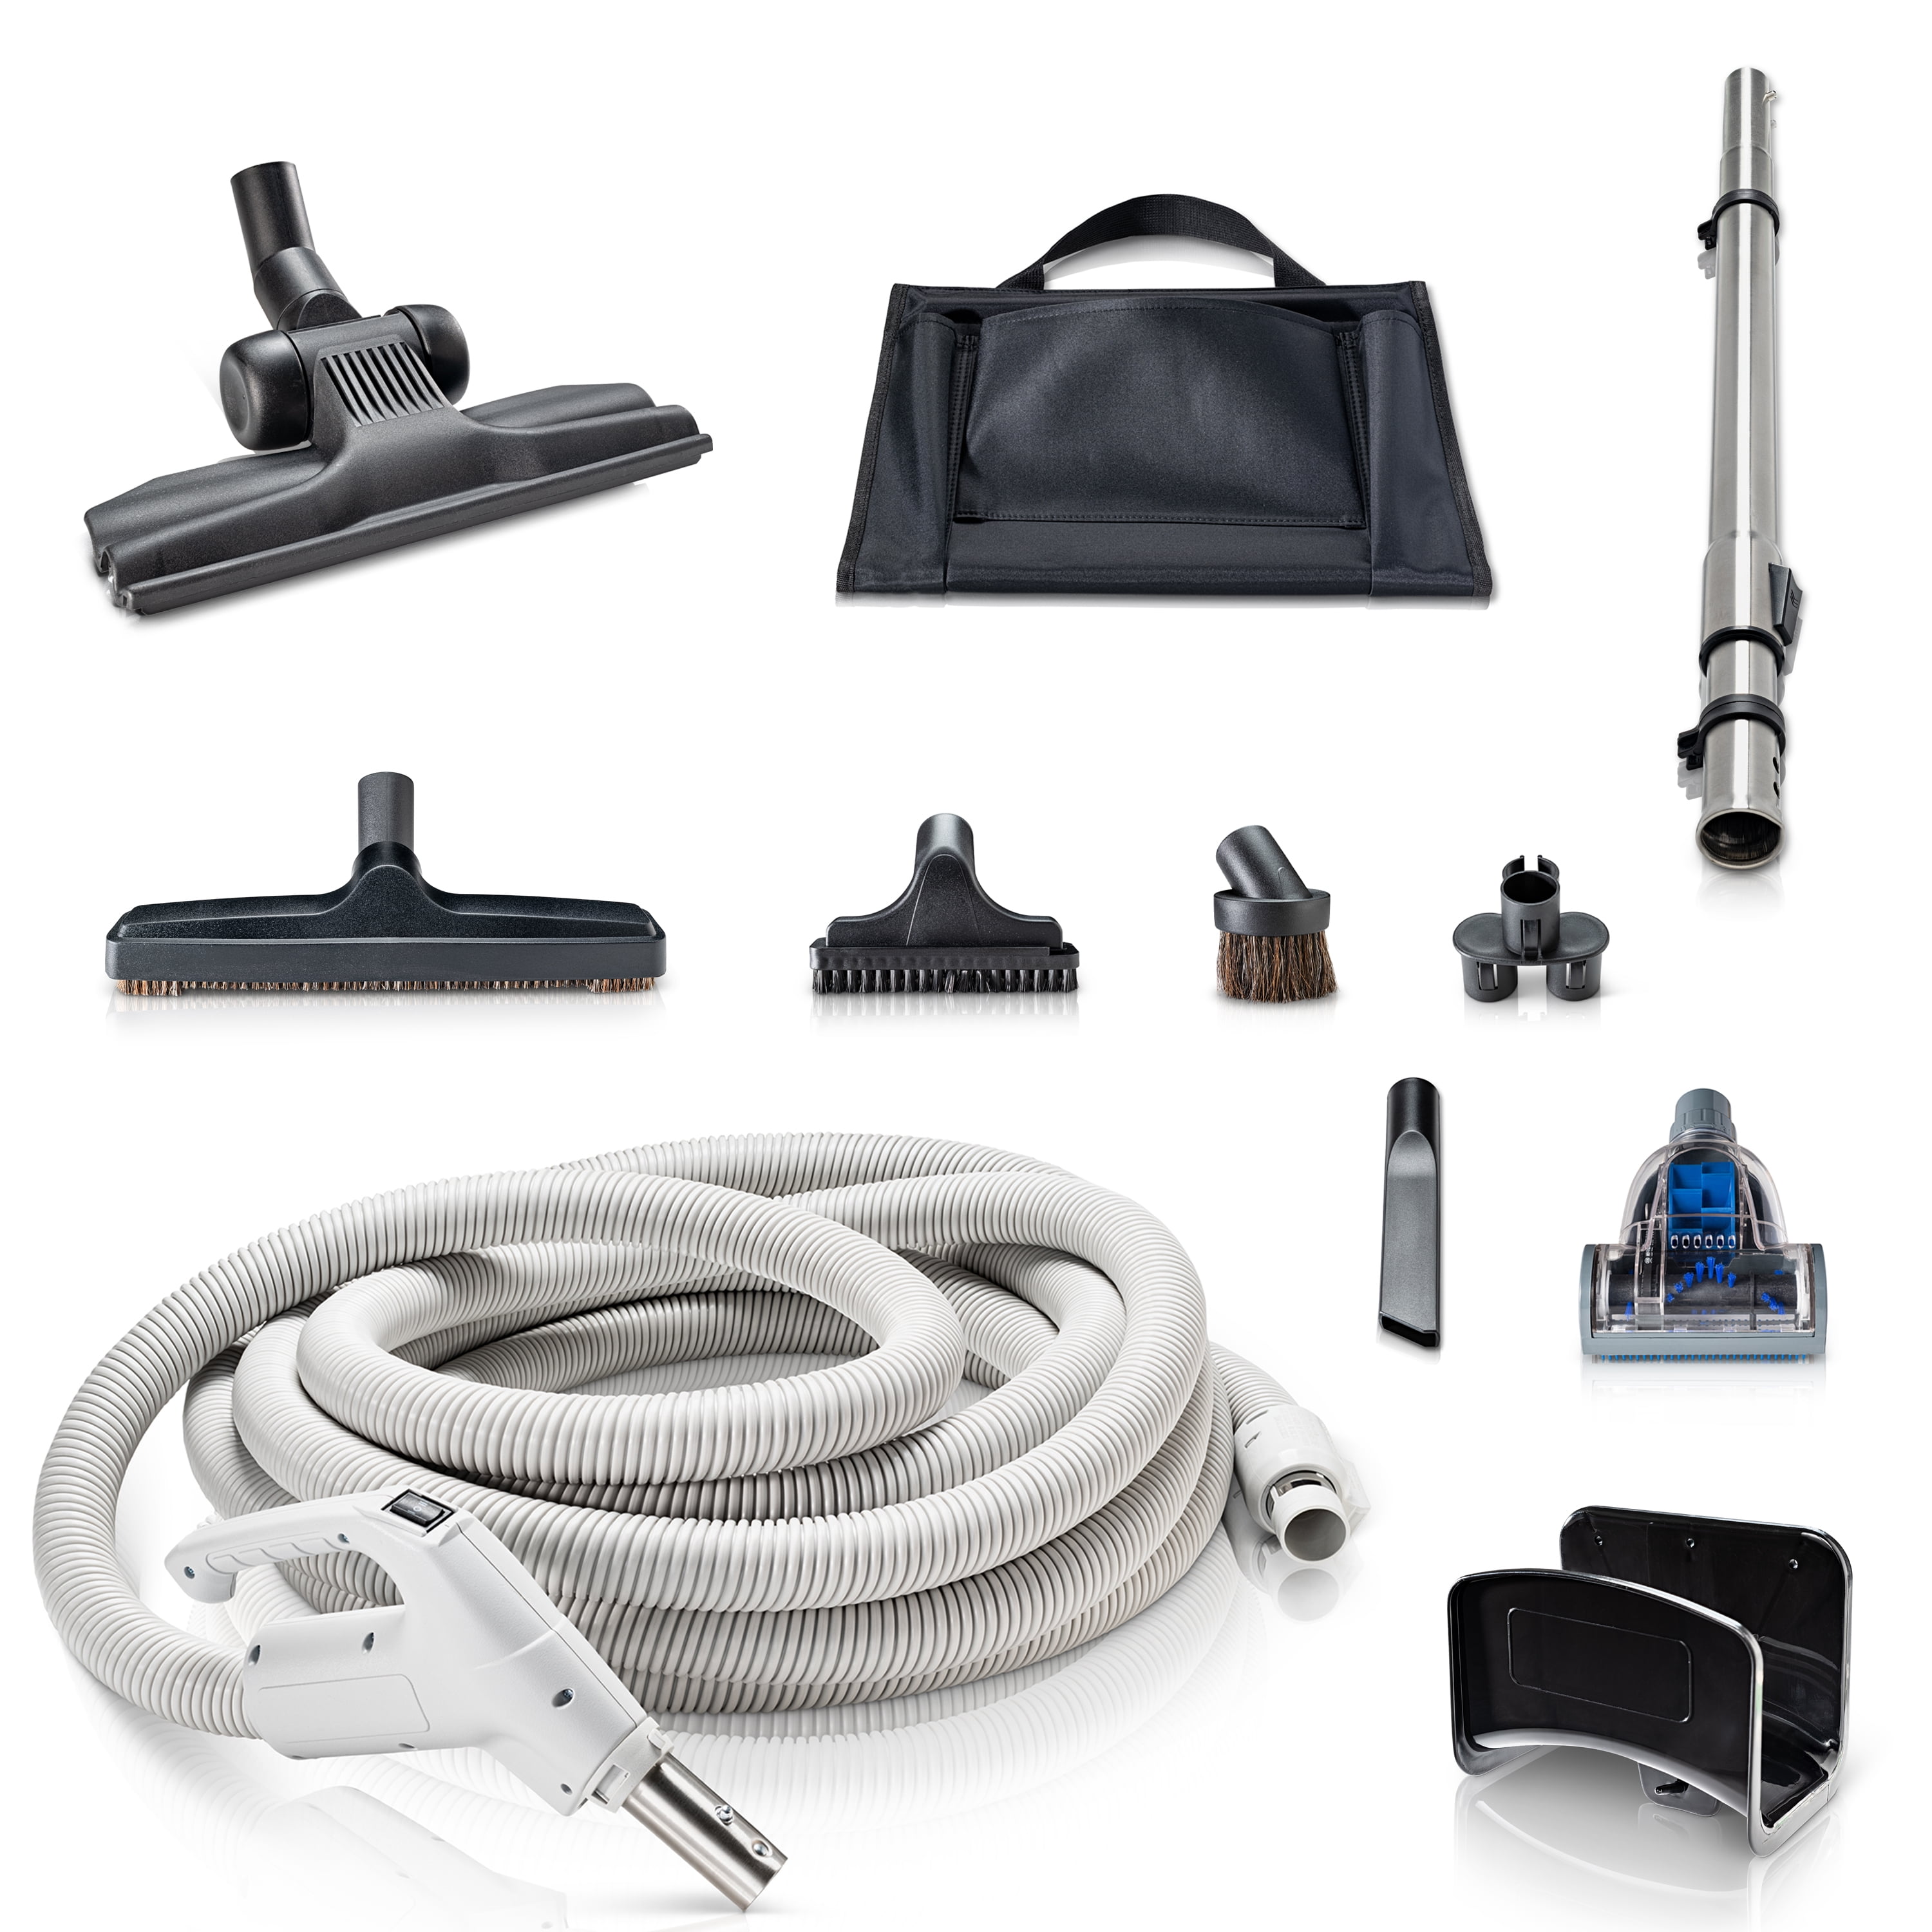 Prolux Premium 35 ft Universal Central Vacuum Hose Kit with Vessel Perk  Power Nozzle - Includes Upholstery Brush, Pet Brush, and More in the Vacuum  Attachment Kits department at